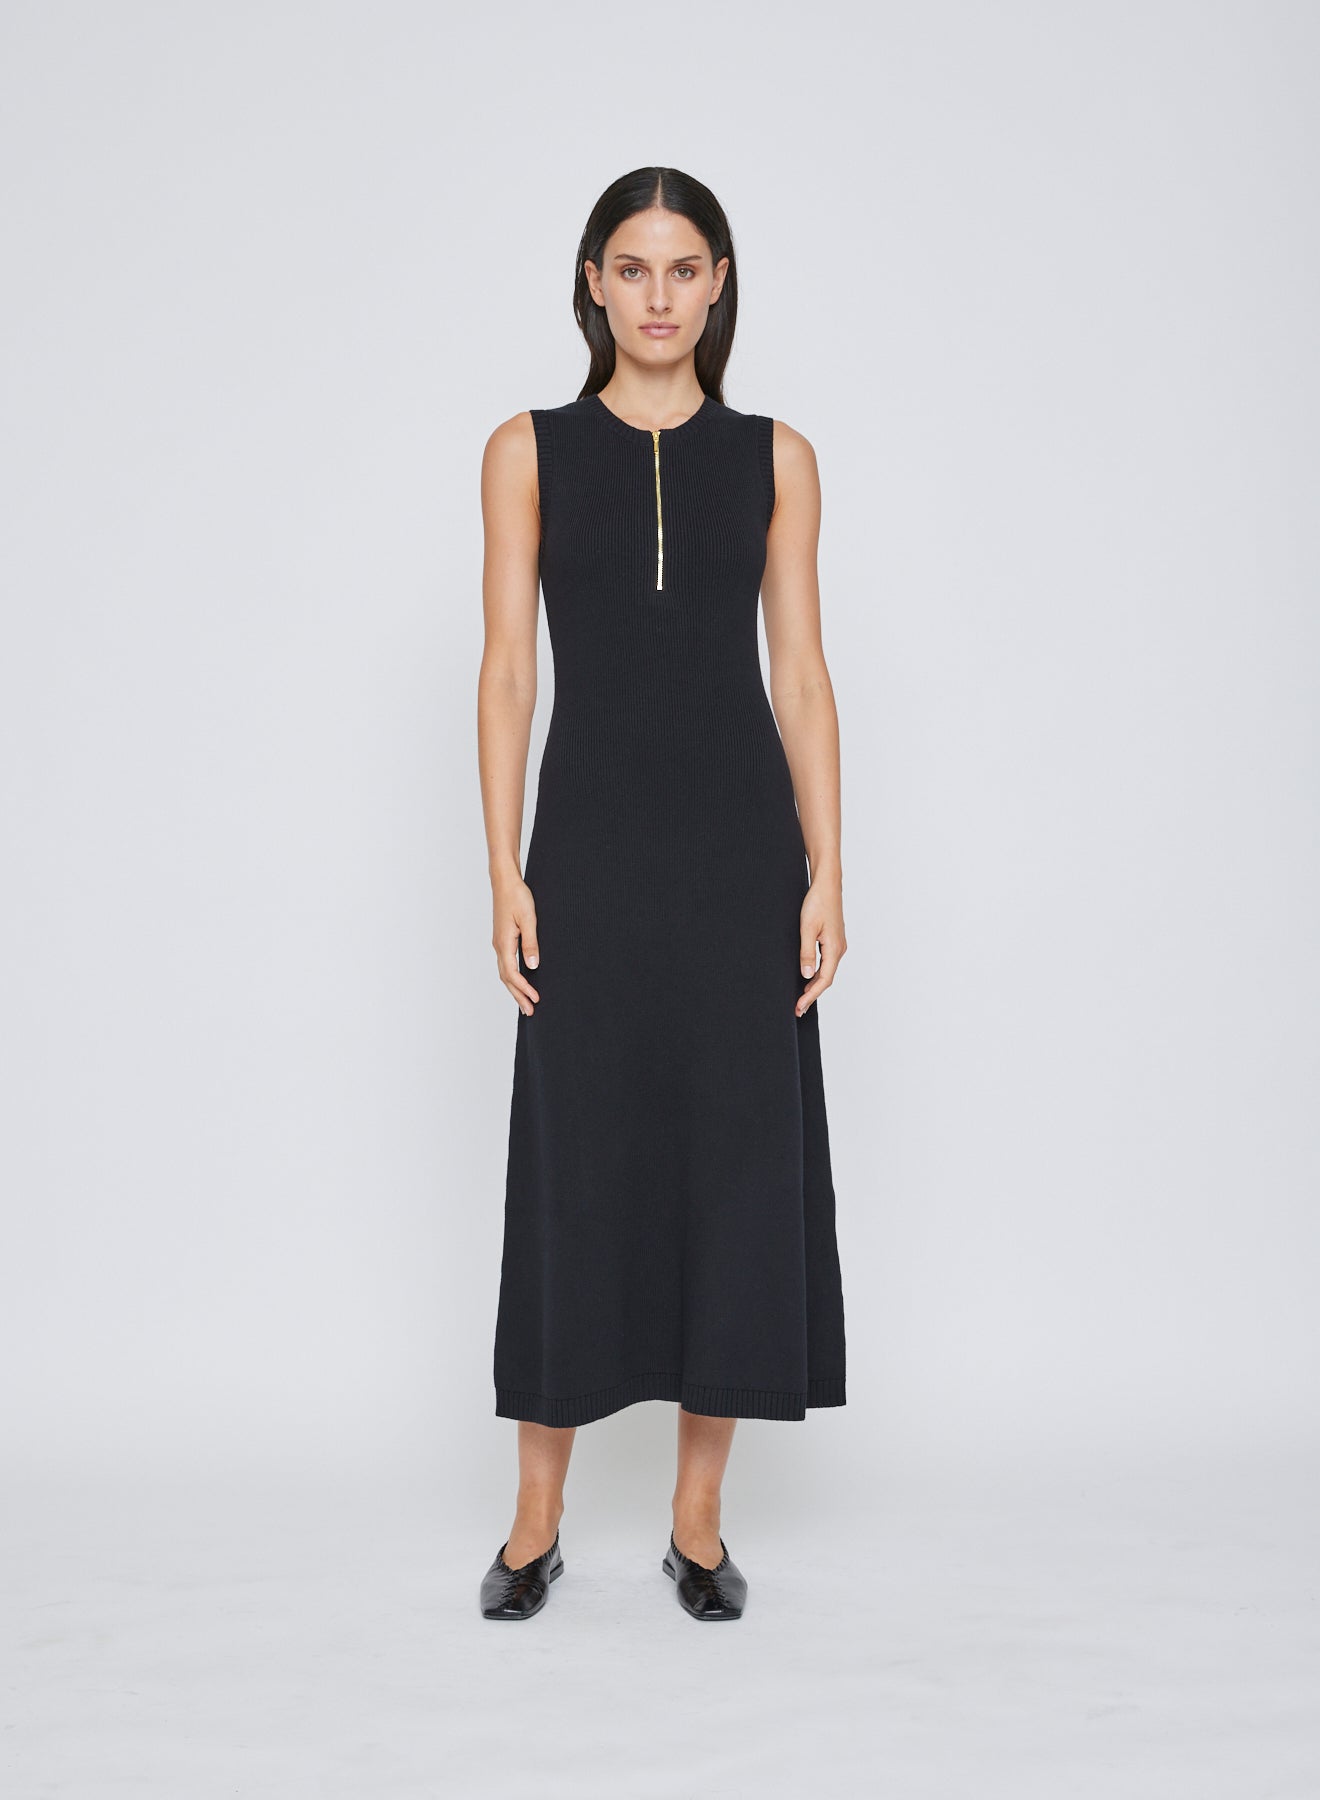 The ANNA QUAN Jennie Dress in Raven is an elevated day to night midi dress, cut in 100% cotton knit. Featuring a sleeveless design and zip closure at the bust.